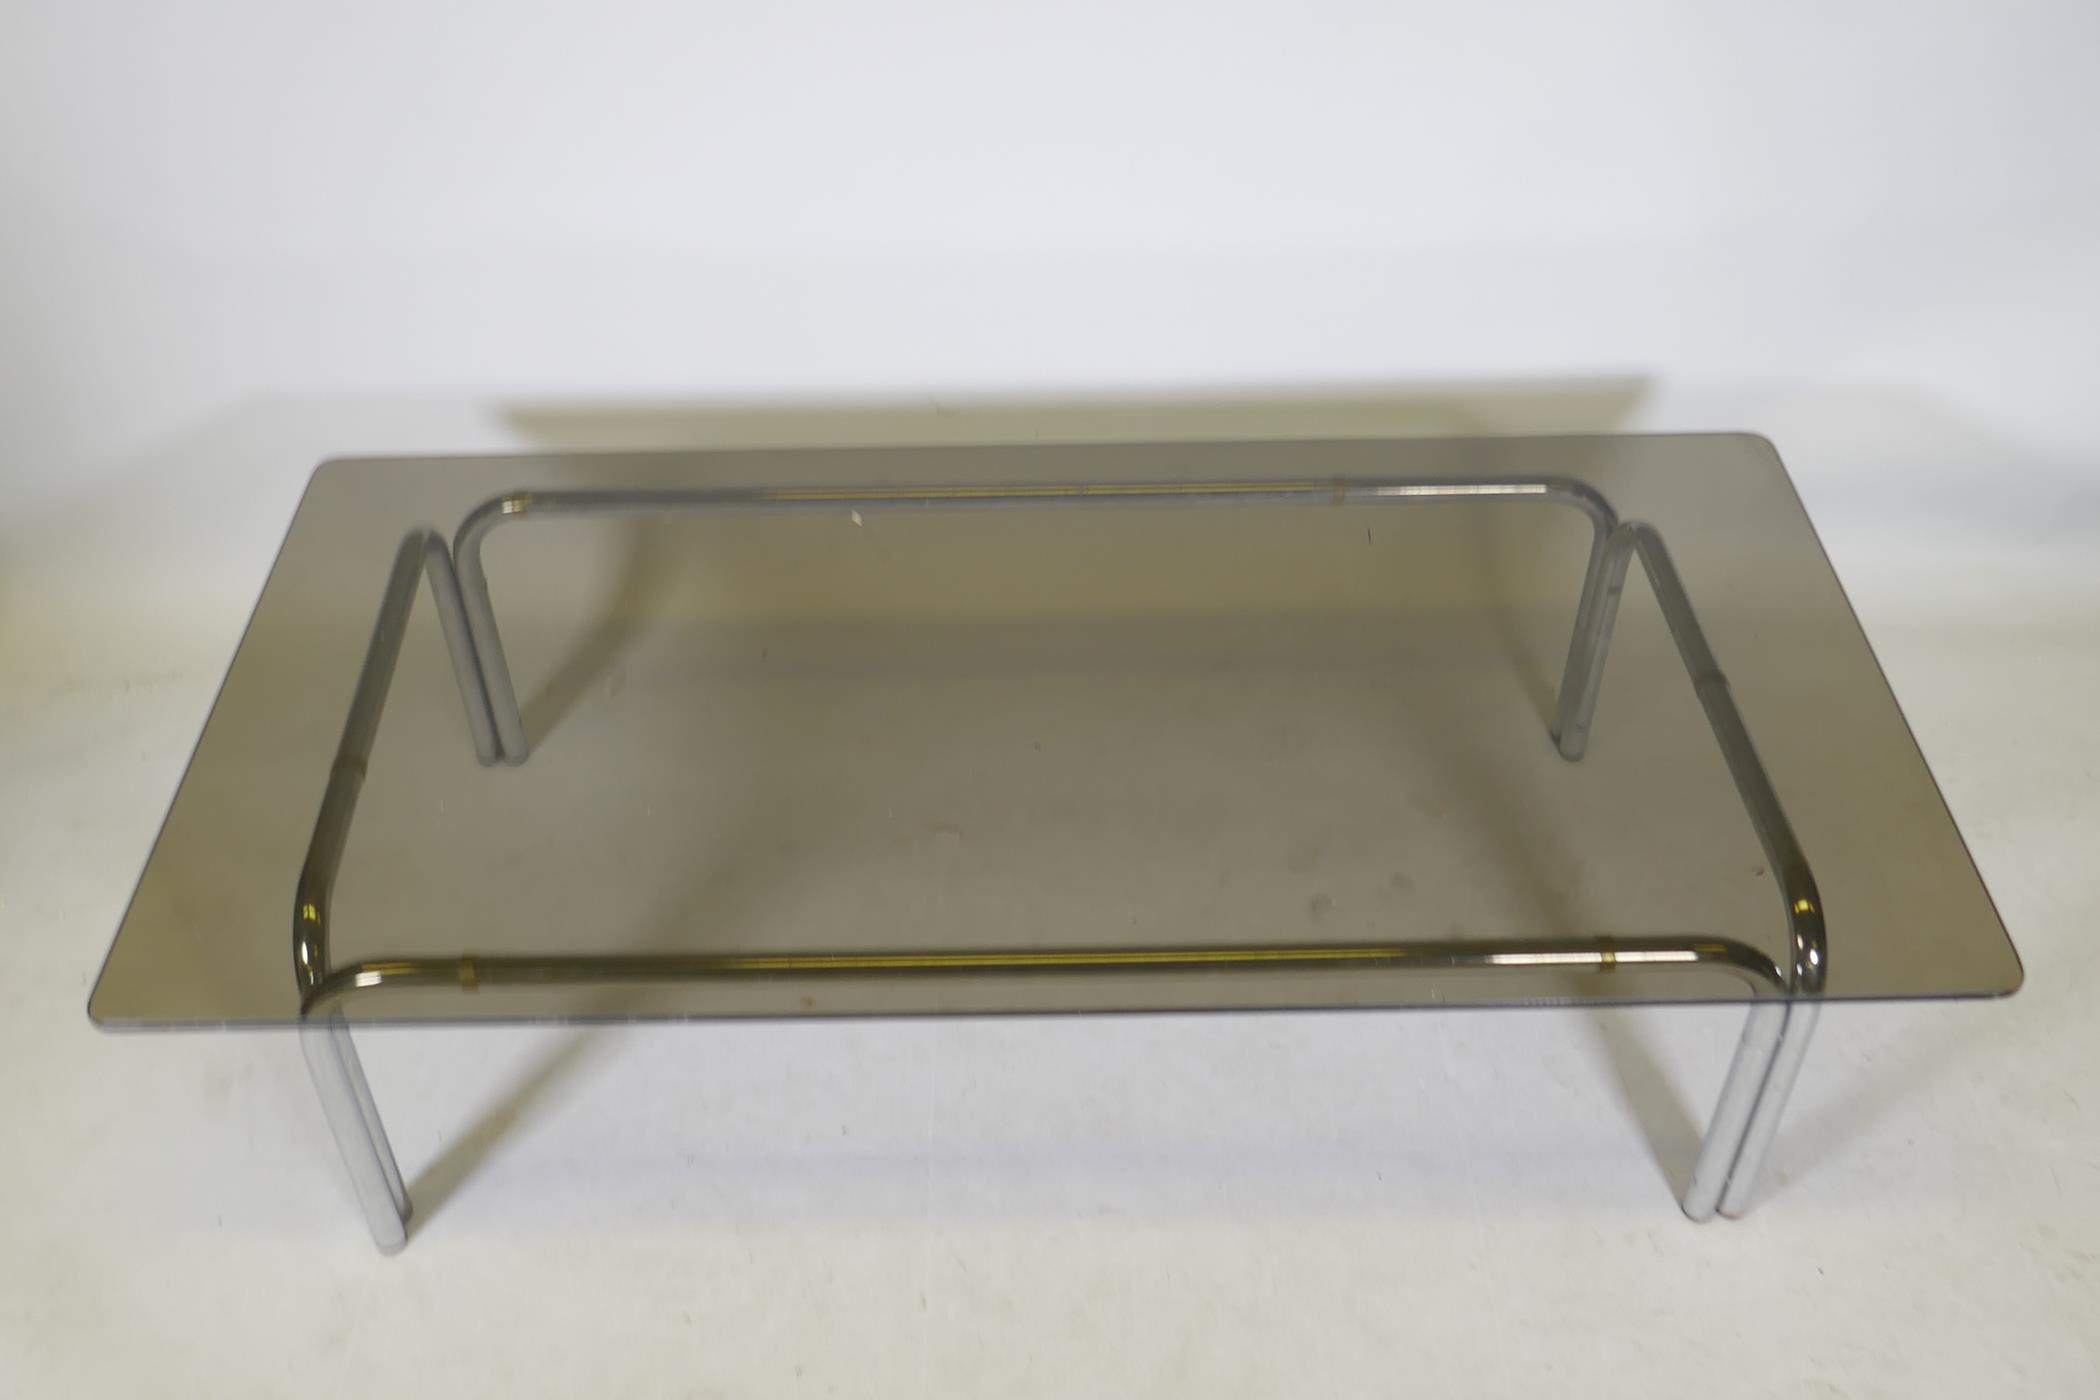 A chromed metal and smoked glass contemporary coffee table, 59" x 29", 15" high - Image 2 of 2